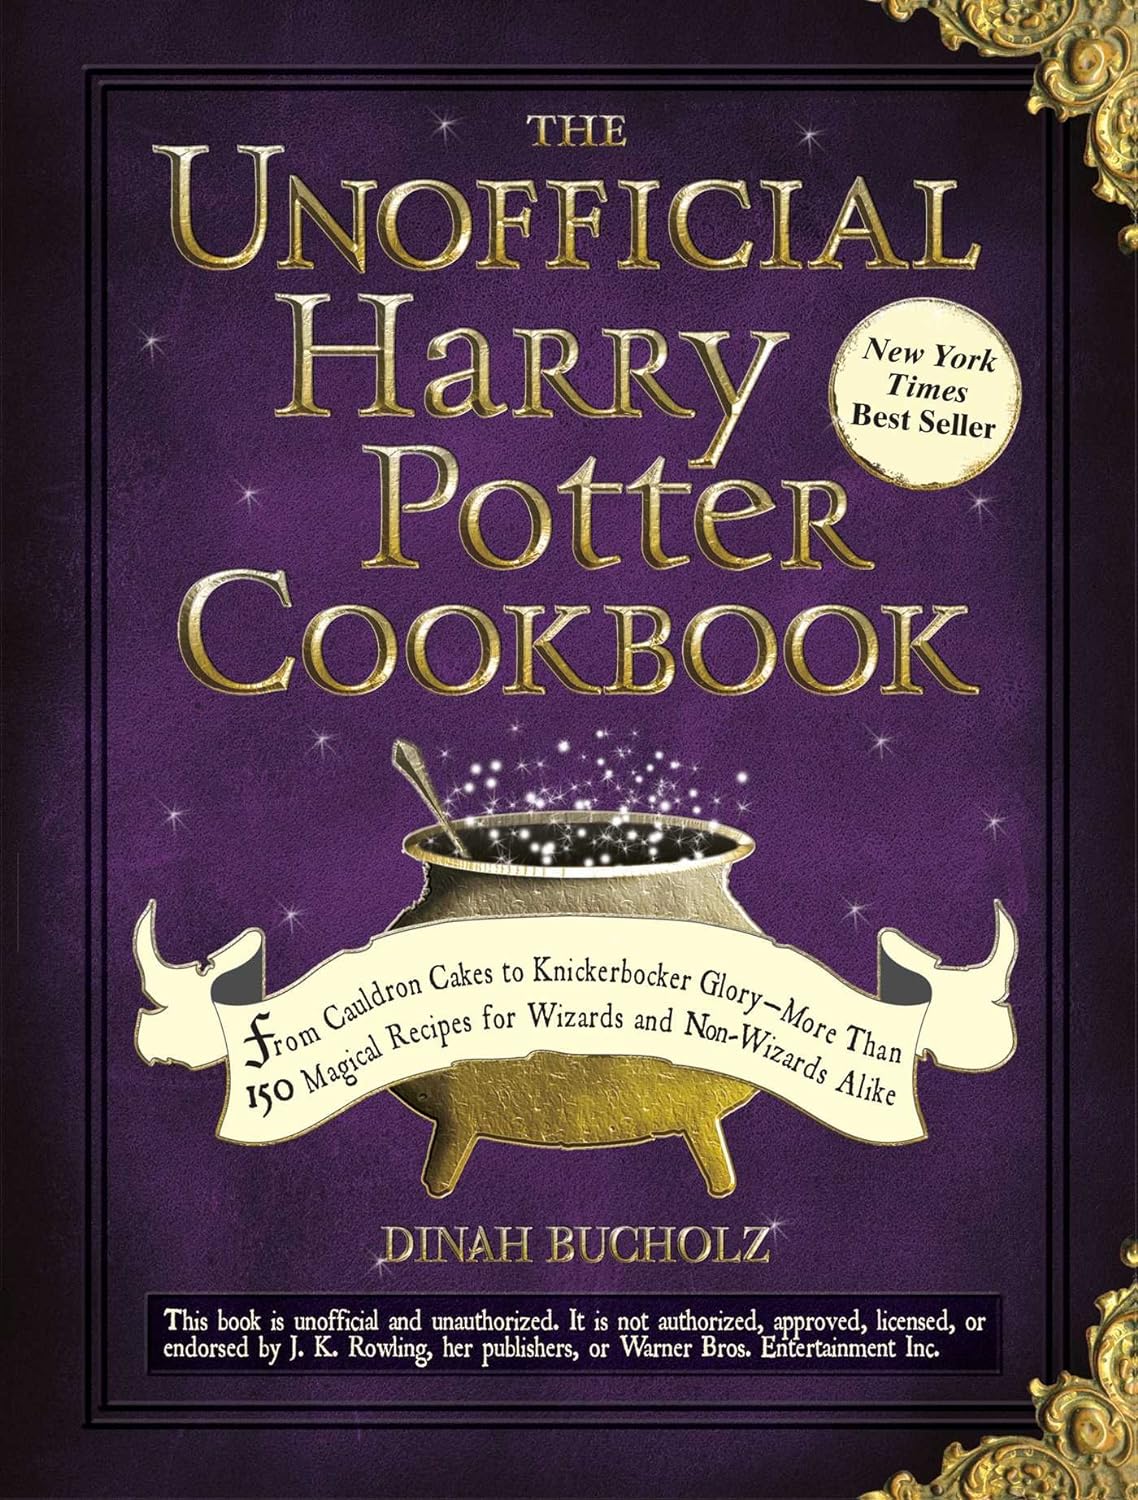 Dinah Bucholz The Unofficial Harry Potter Cookbook: From Cauldron Cakes to Knickerbocker Glory-More Than 150 Magical Recipes for Muggles and Wizards 